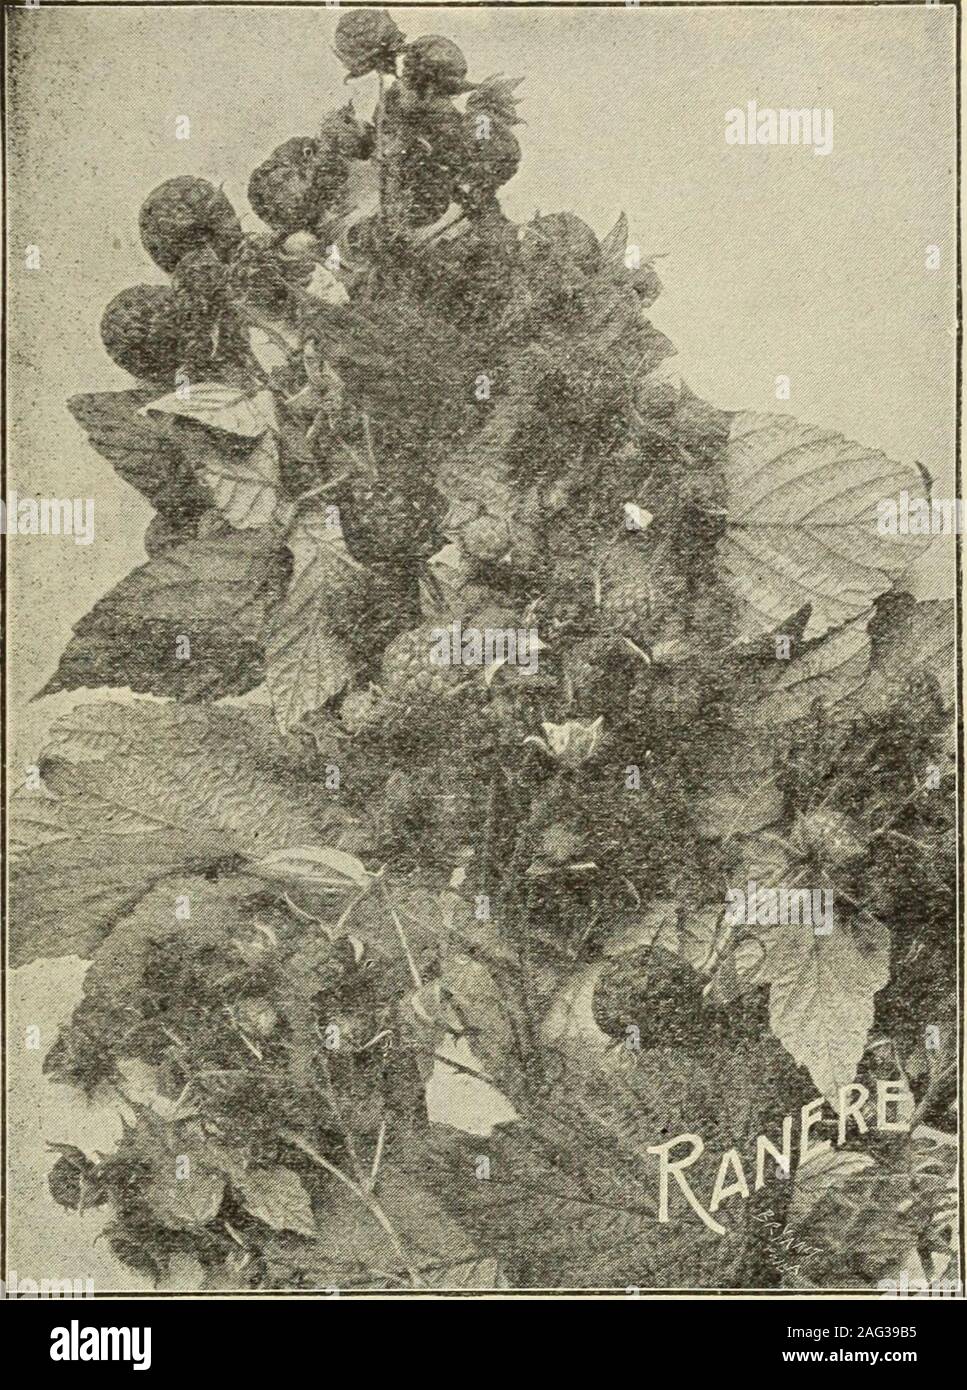 . Johnson's garden & farm manual : 1915. Scandens (Bitter Sweet). A rapid climber; yellow flowers . .Cinnamon Vine. Fragrant white flowers. (Dry Roots) (By mail),Bignonia (TrumpetVine). Grandiflora. Large orange red flowers Bignonia Badicans. Dark red; orange throat Clematis Paniculta (Japanese Virgins Bower). Sweet-scented, star-shaped flowers 25 2 50 25 2 50 50 5 00 25 2 50 10 1 00 50 5 00 25 2 50 Each Clematis Jackmani. Rich purple. .. .30 40 Anderson Henryi. Creamywhite 40 Hop Vines. (Humulus). Golden-leaved. (By mail 20c.) If Honeysuckle. Chinese Evergreen(Woodbine). Fragrant red, yel-low Stock Photo